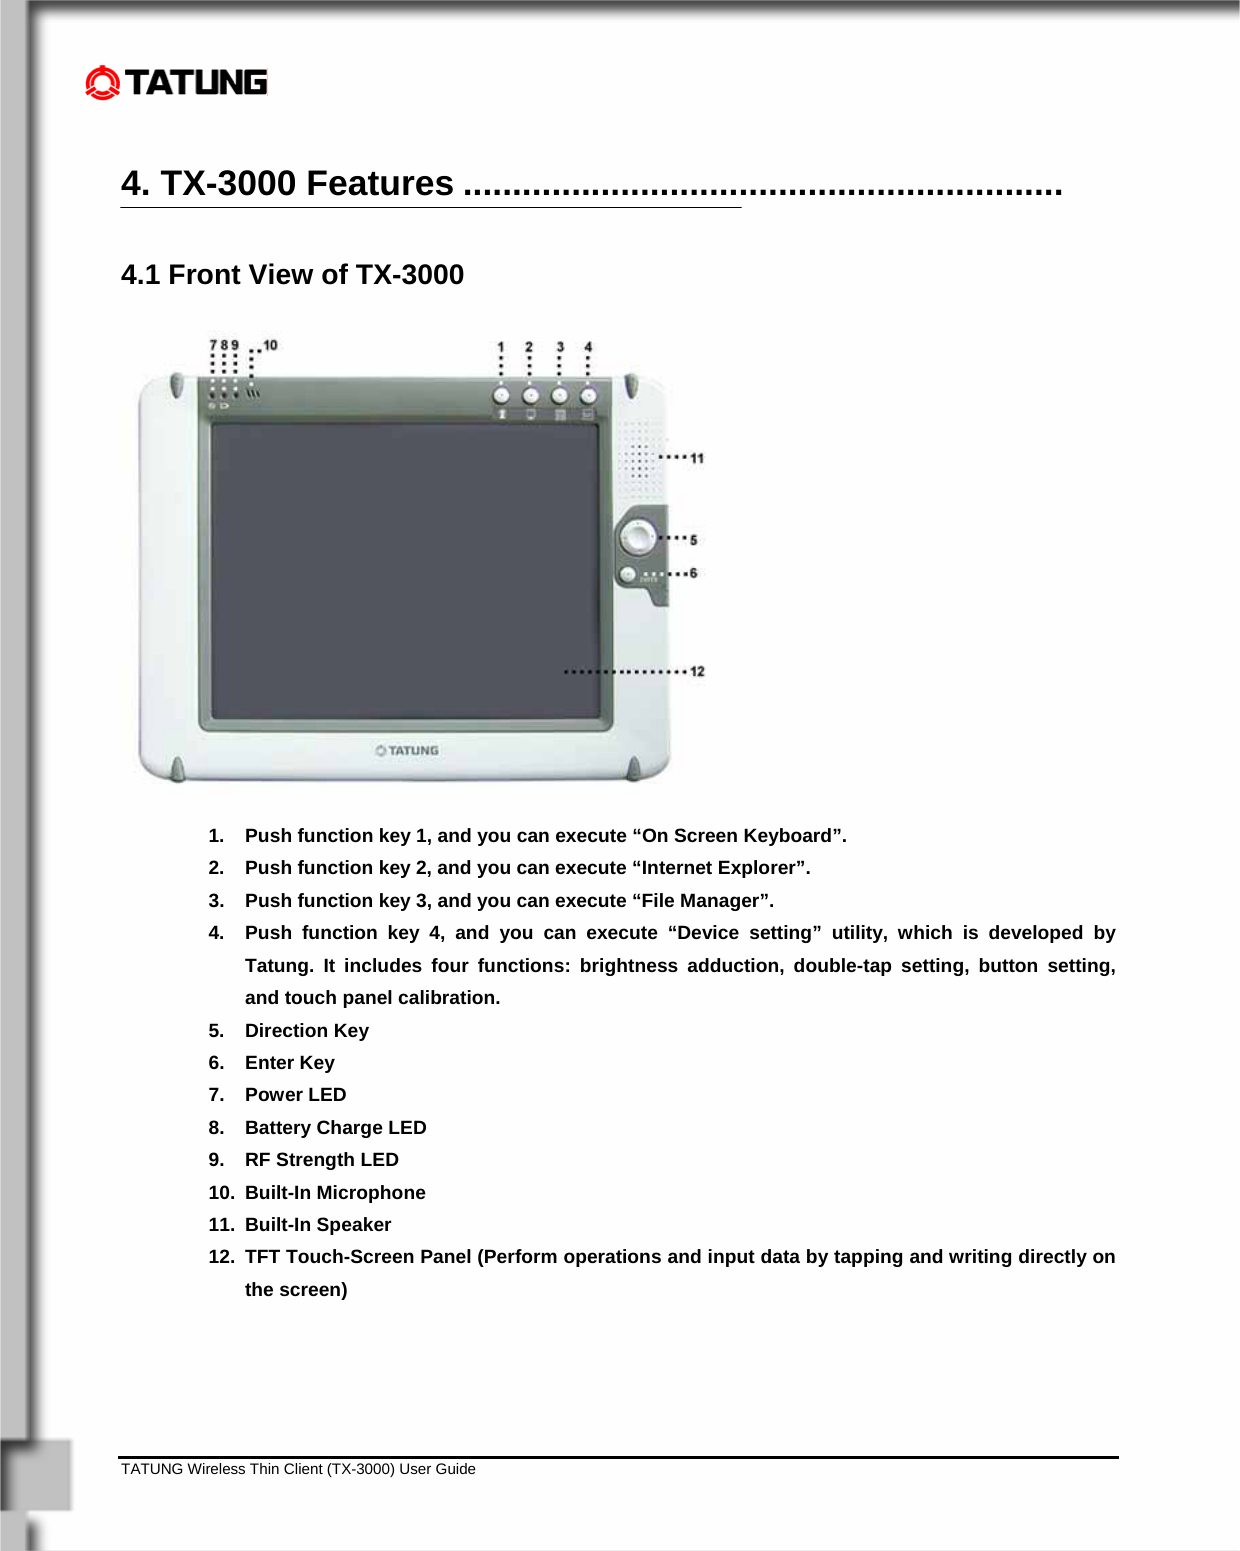    TATUNG Wireless Thin Client (TX-3000) User Guide                                                                                                                              4. TX-3000 Features ............................................................. 4.1 Front View of TX-3000  1.  Push function key 1, and you can execute “On Screen Keyboard”. 2.  Push function key 2, and you can execute “Internet Explorer”. 3.  Push function key 3, and you can execute “File Manager”. 4.  Push function key 4, and you can execute “Device setting” utility, which is developed by Tatung. It includes four functions: brightness adduction, double-tap setting, button setting, and touch panel calibration. 5. Direction Key 6. Enter Key 7.  Power LED  8.  Battery Charge LED 9. RF Strength LED 10. Built-In Microphone 11. Built-In Speaker 12.  TFT Touch-Screen Panel (Perform operations and input data by tapping and writing directly on the screen)  